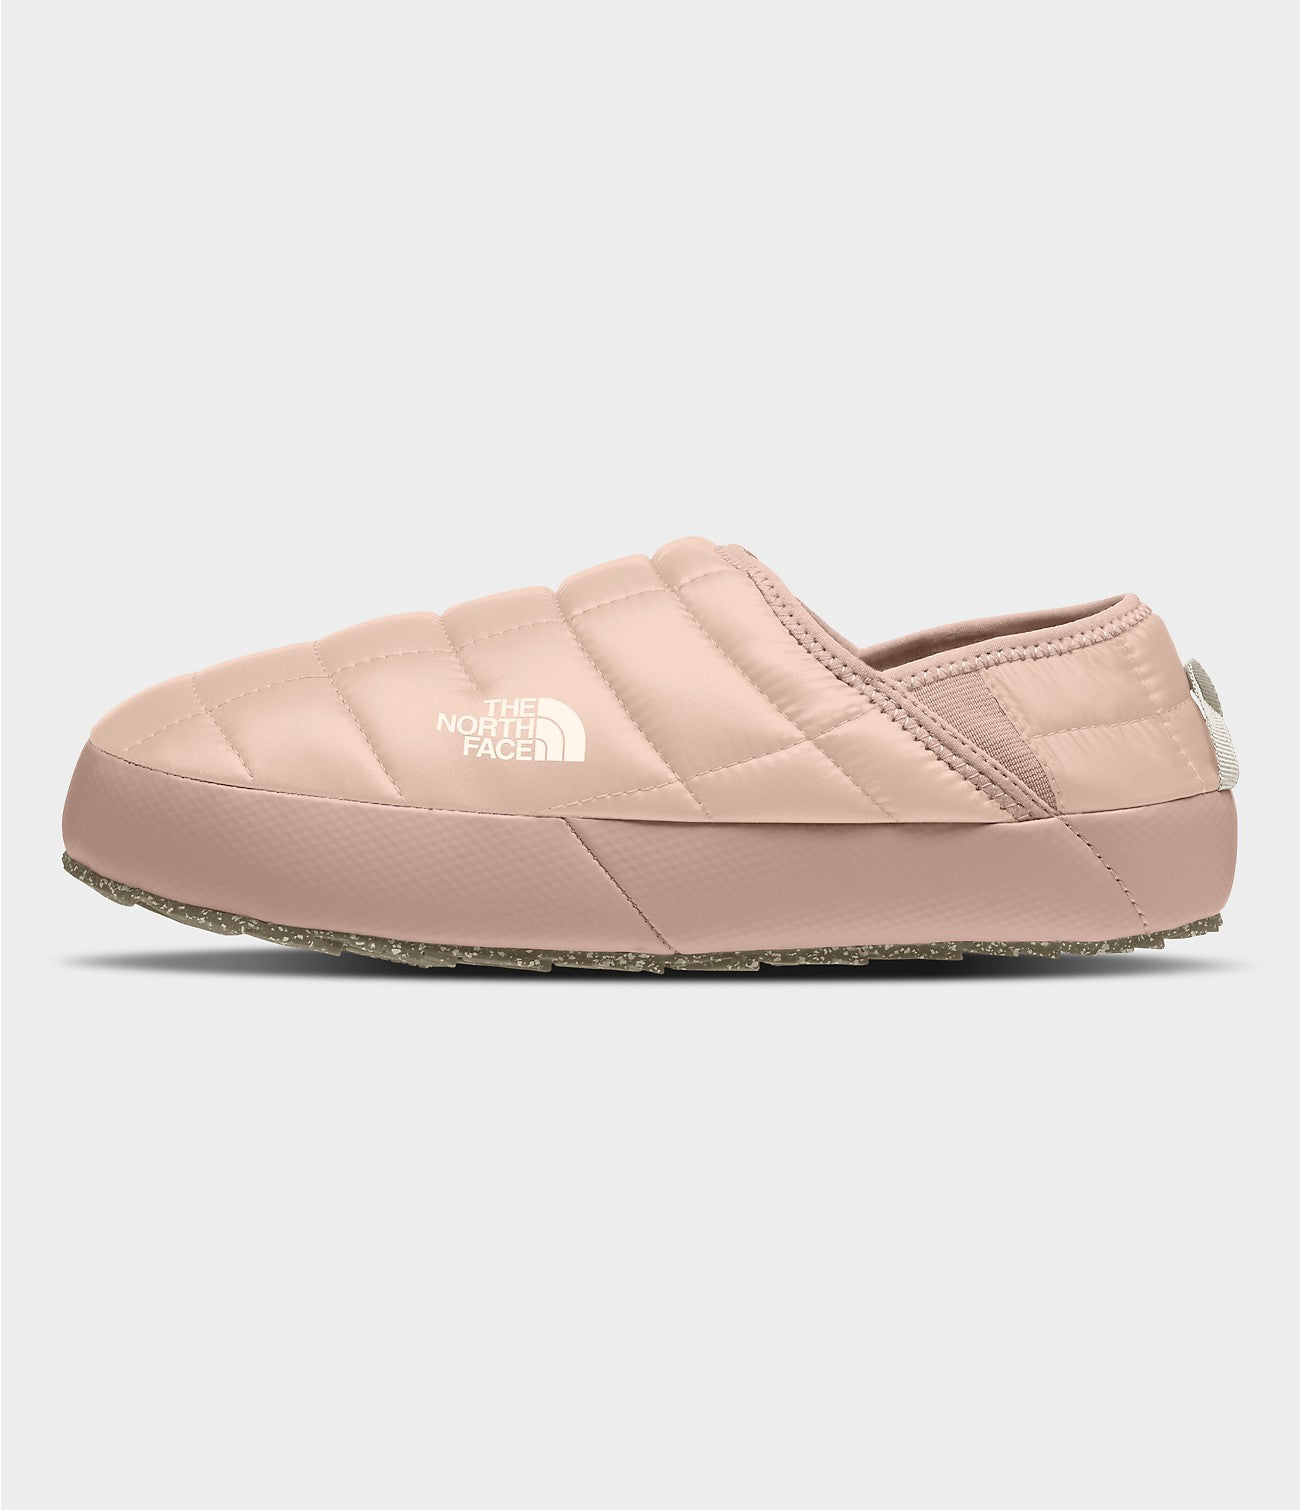 ThermoBall Traction Mule V Pour Femmes - Evening Sand Pink